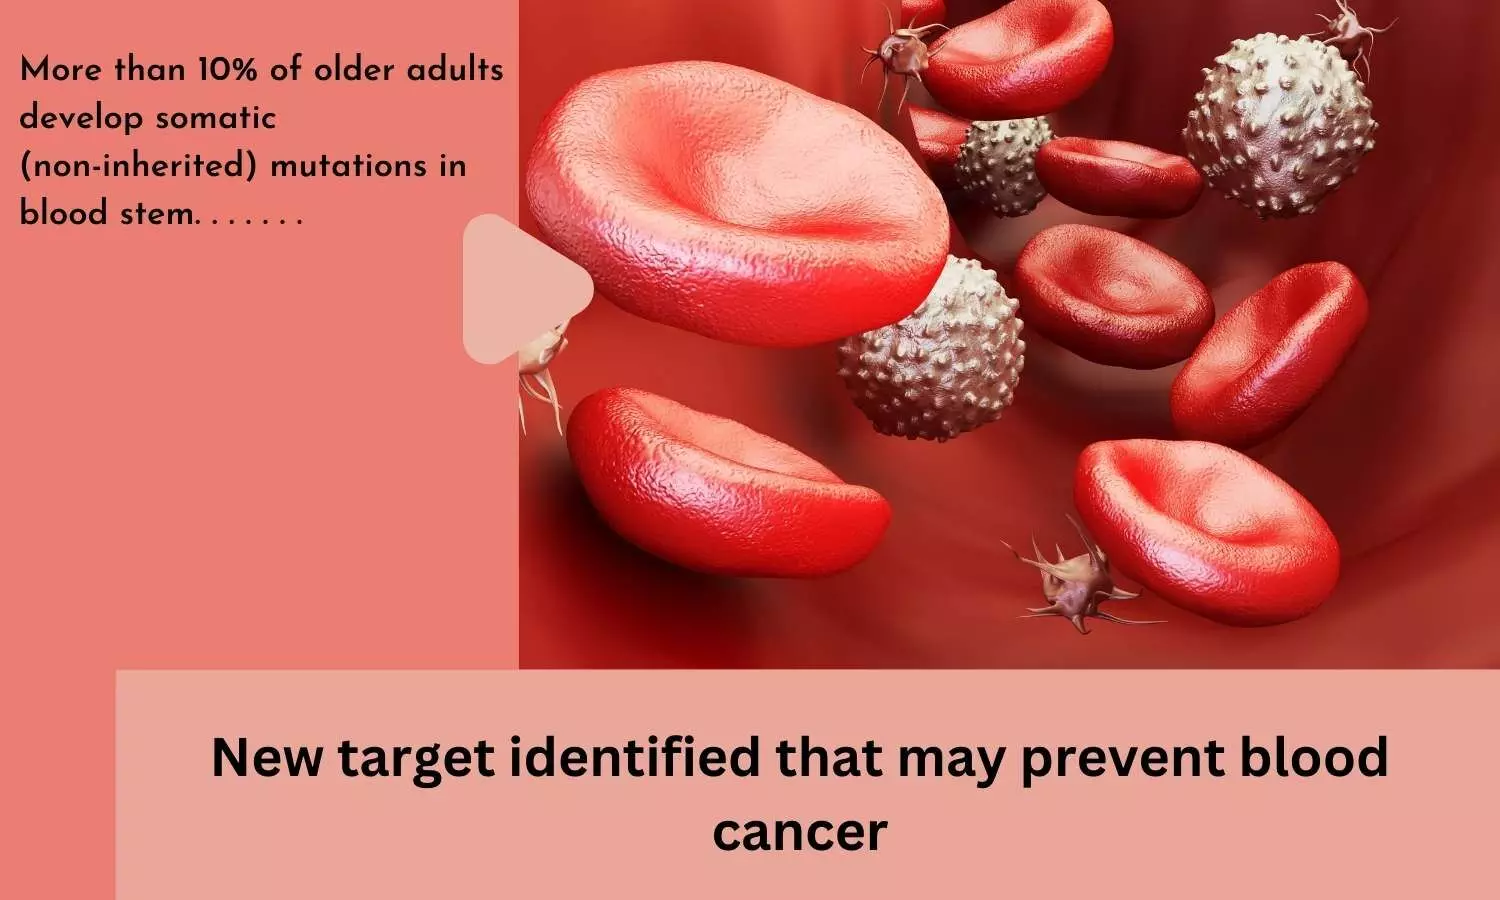 New target identified that may prevent blood cancer